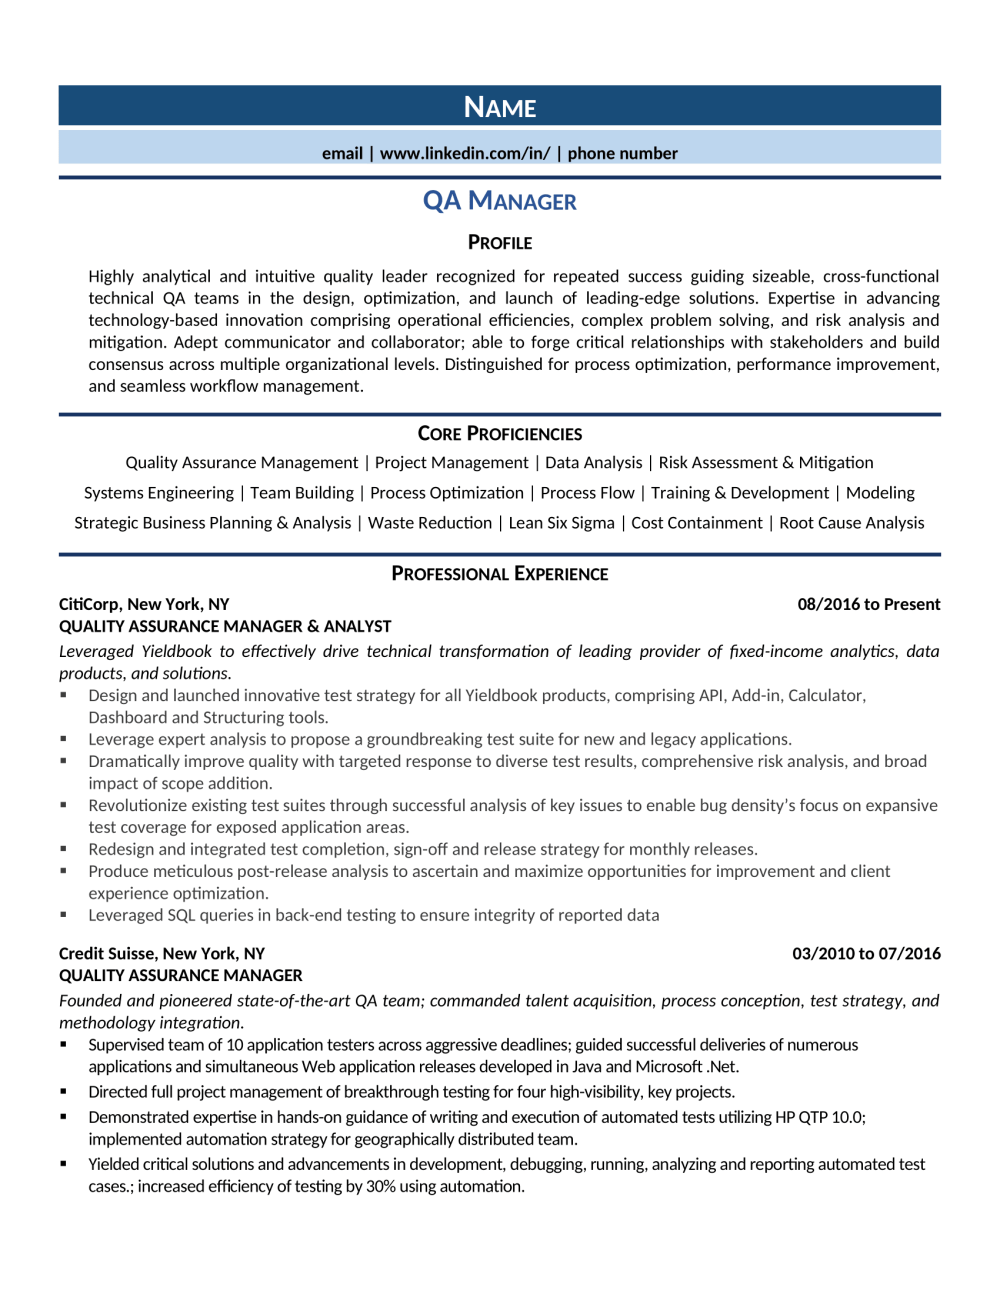 resume template for quality assurance manager